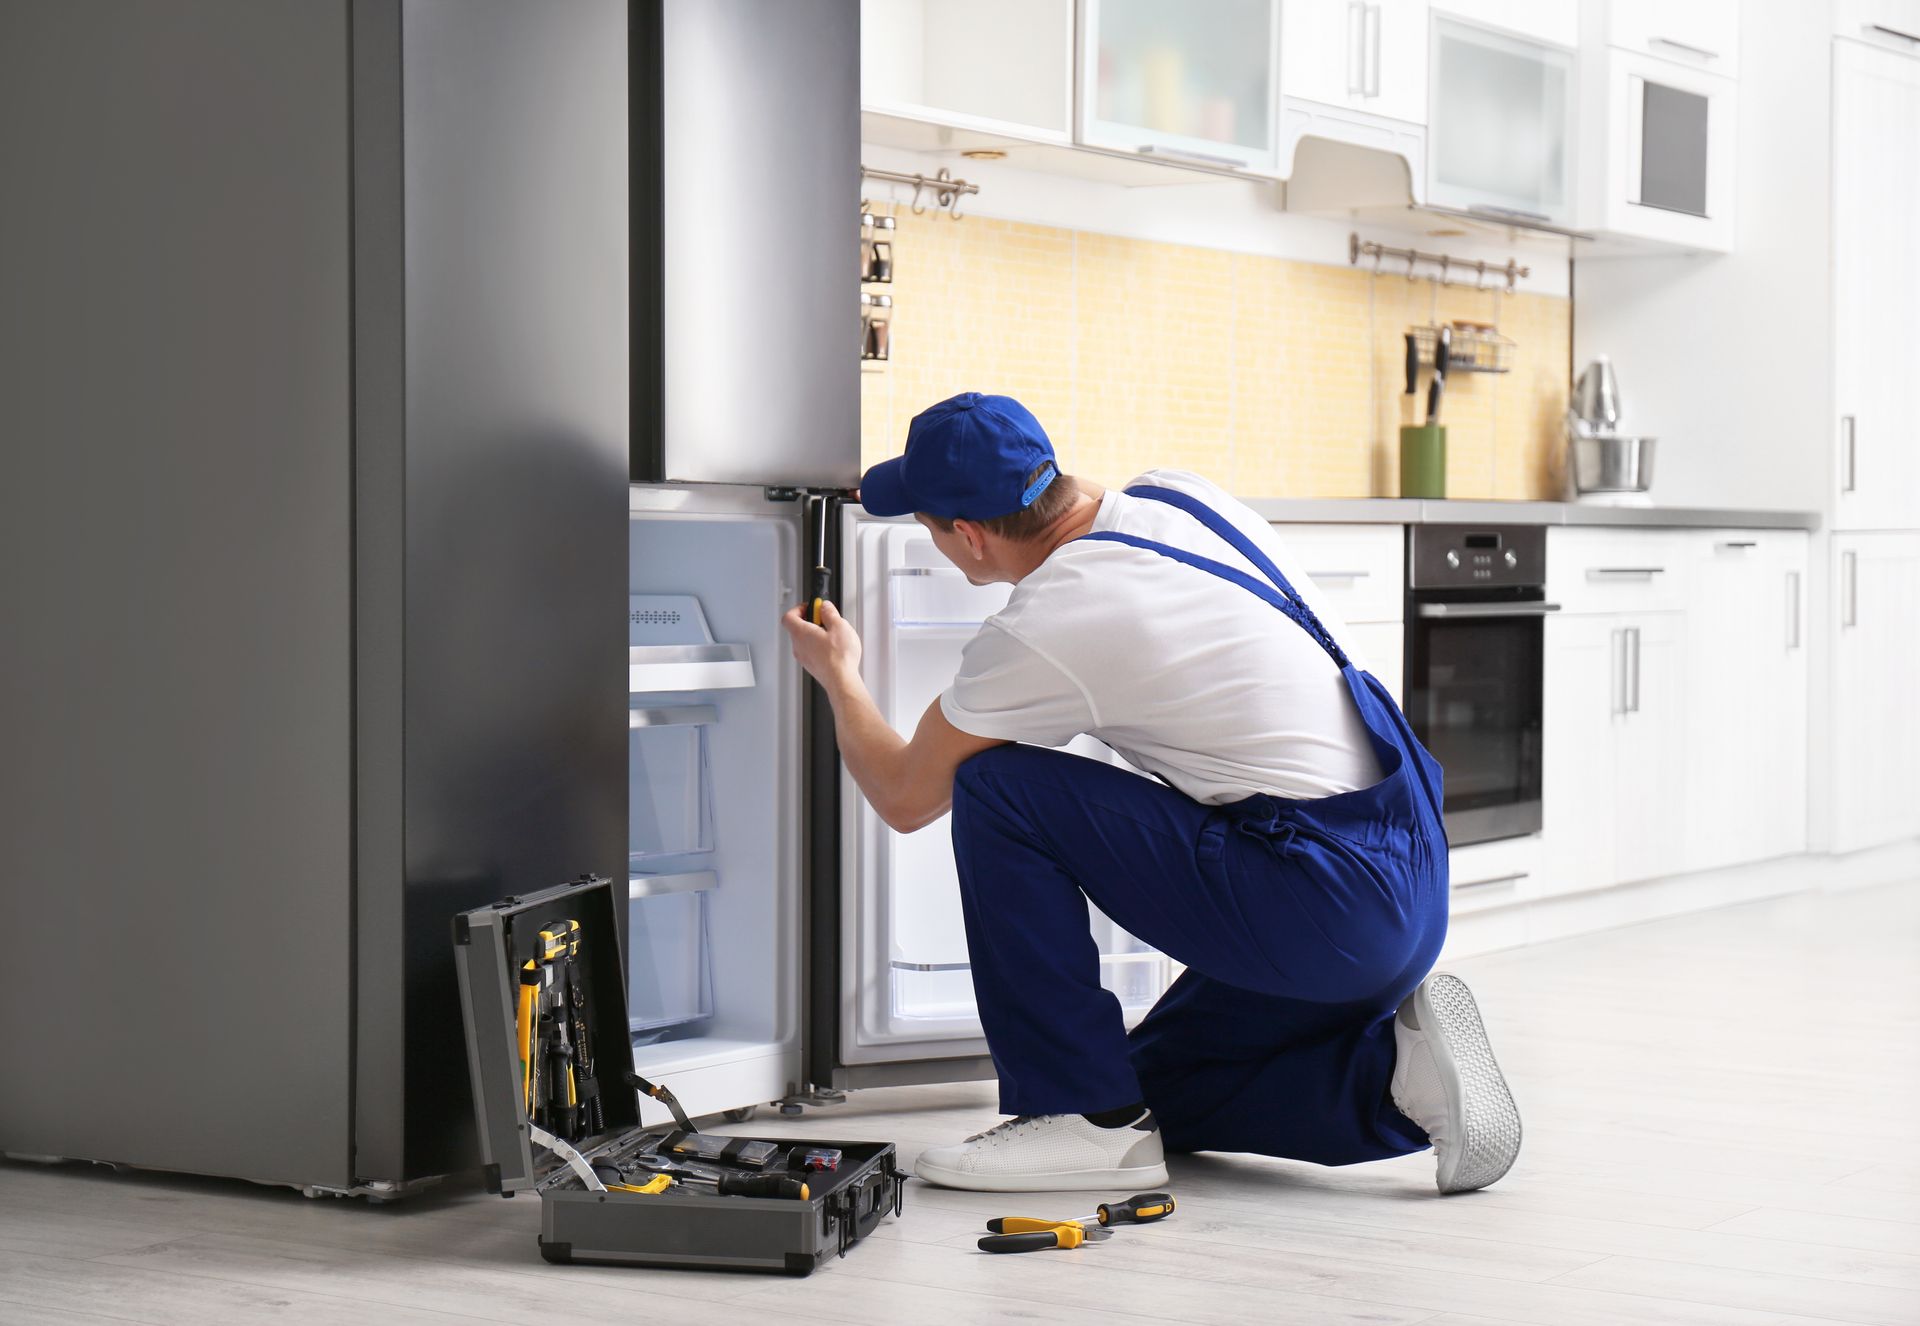 A handyman is using a screwdriver to install a refrigerator in a kitchen.